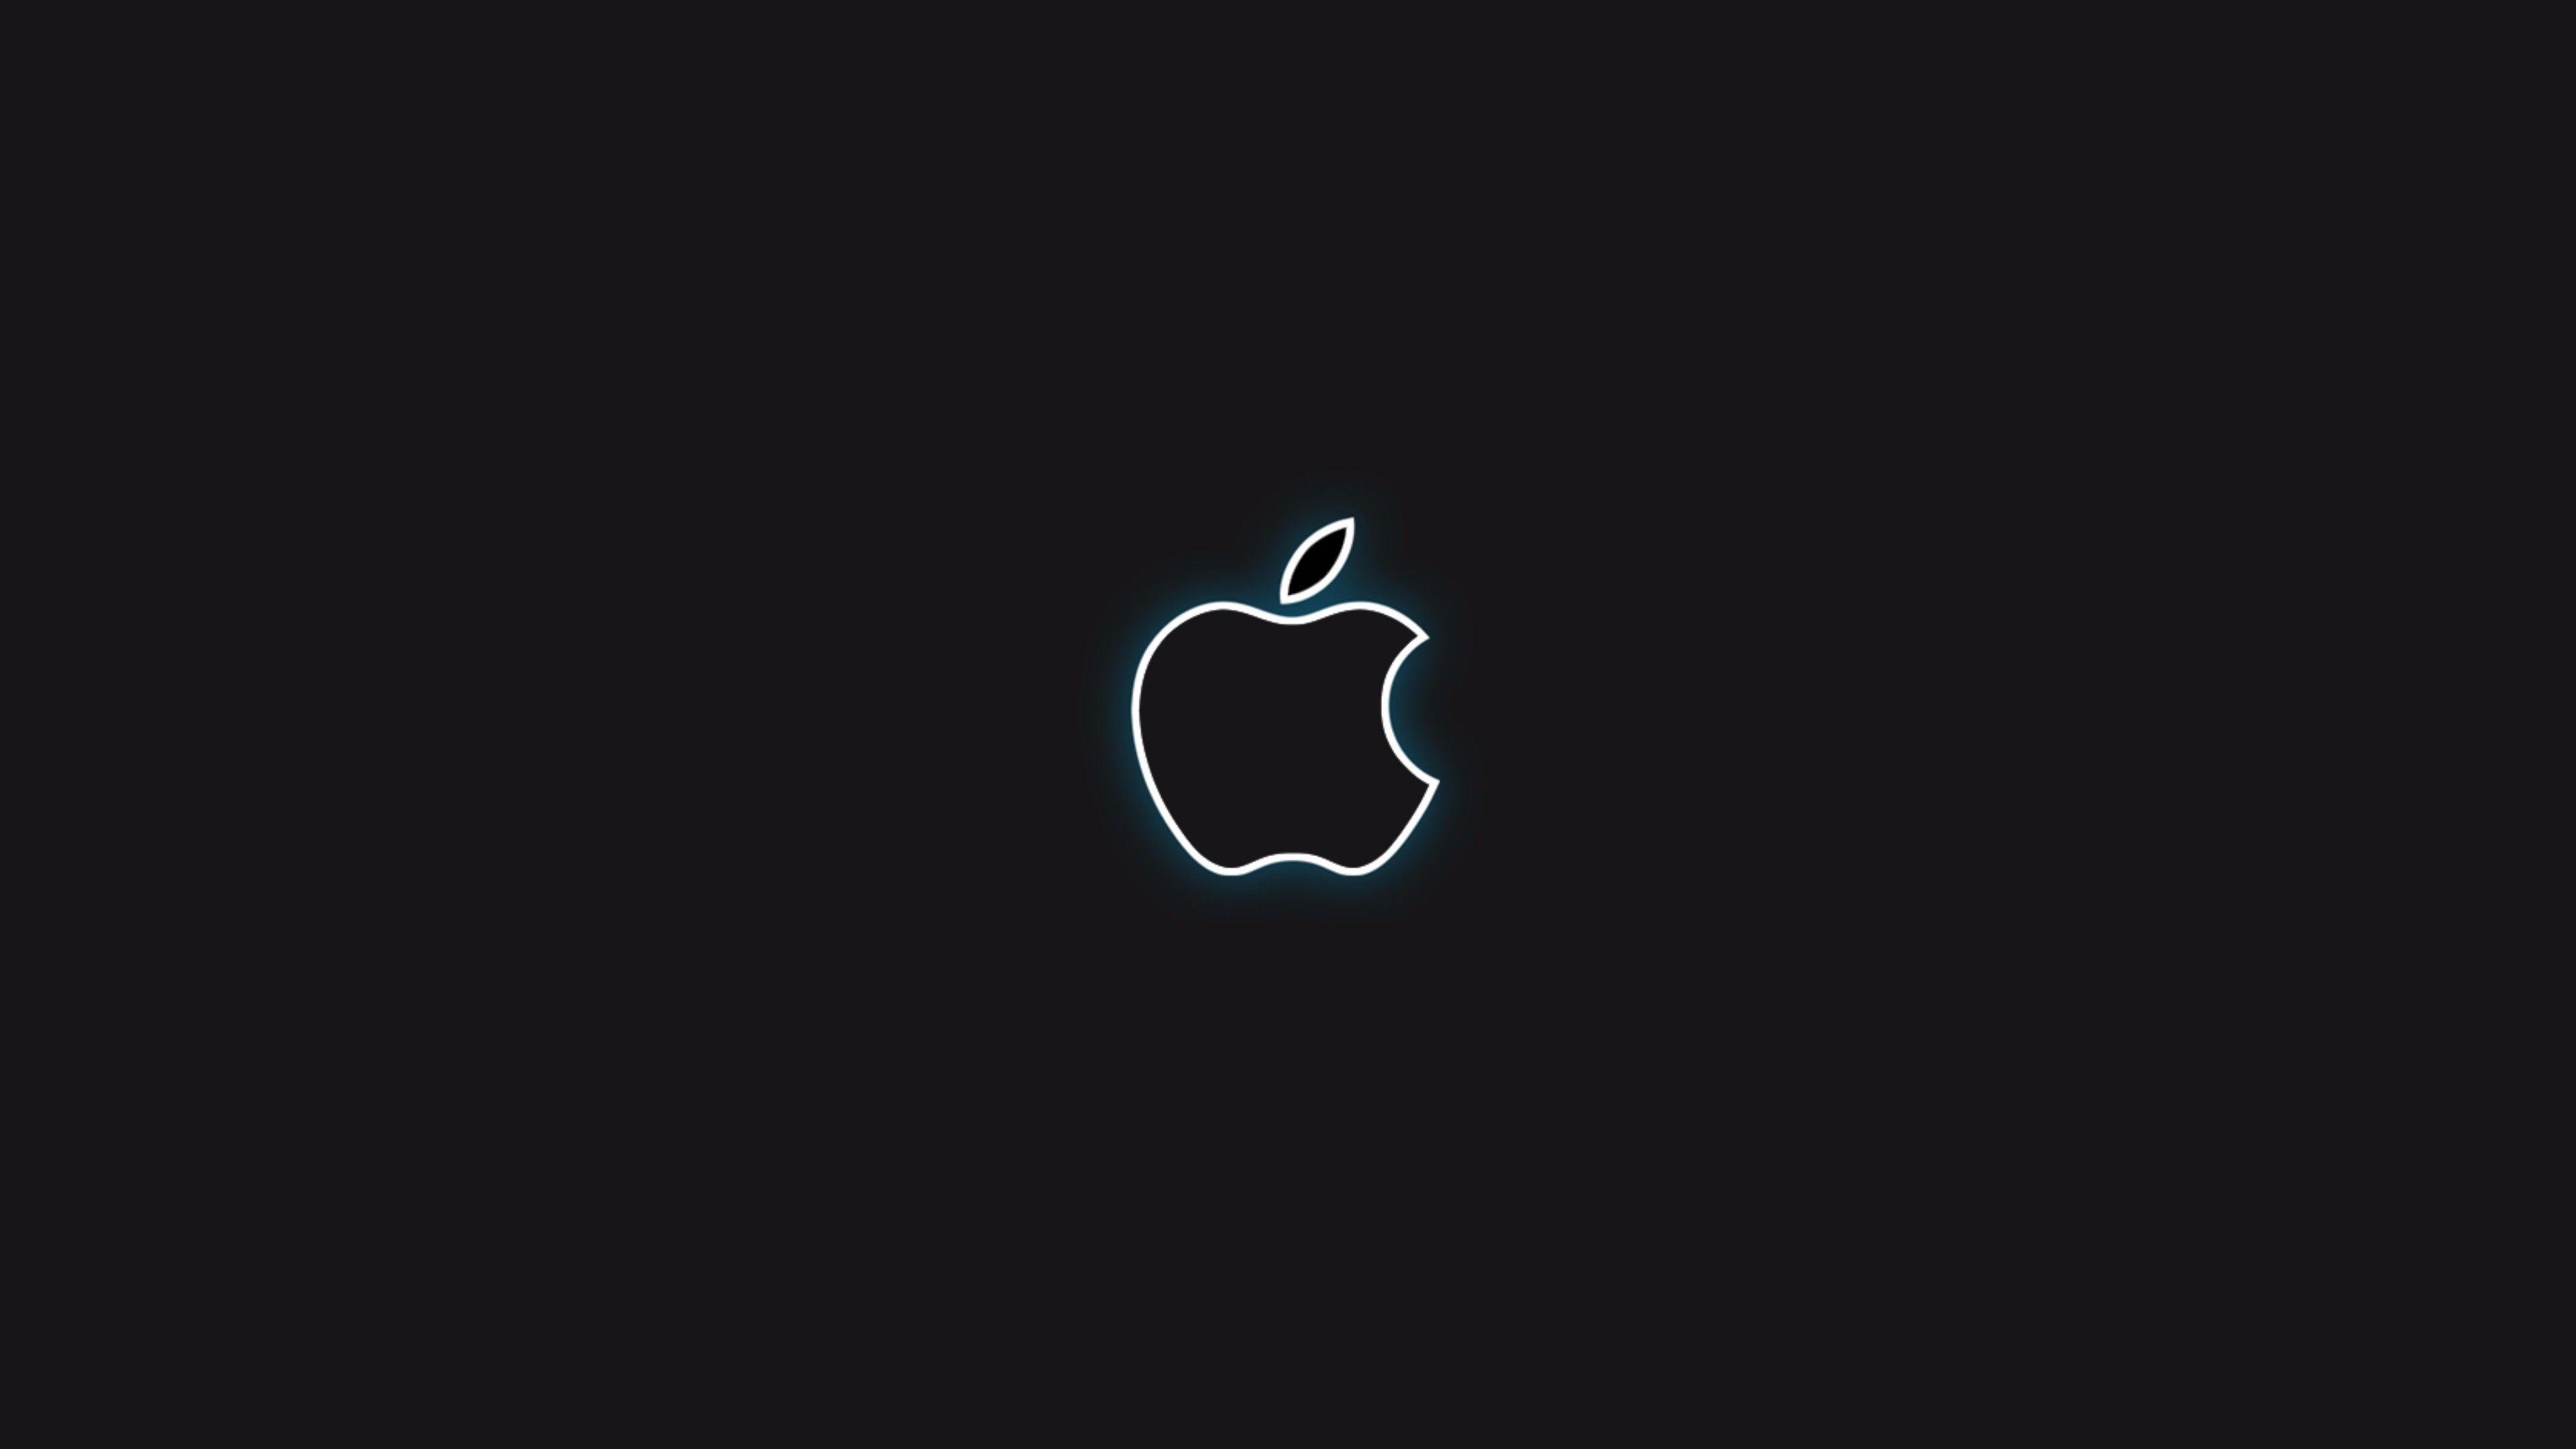 Apple Black Wallpapers Top Free Apple Black Backgrounds Images, Photos, Reviews